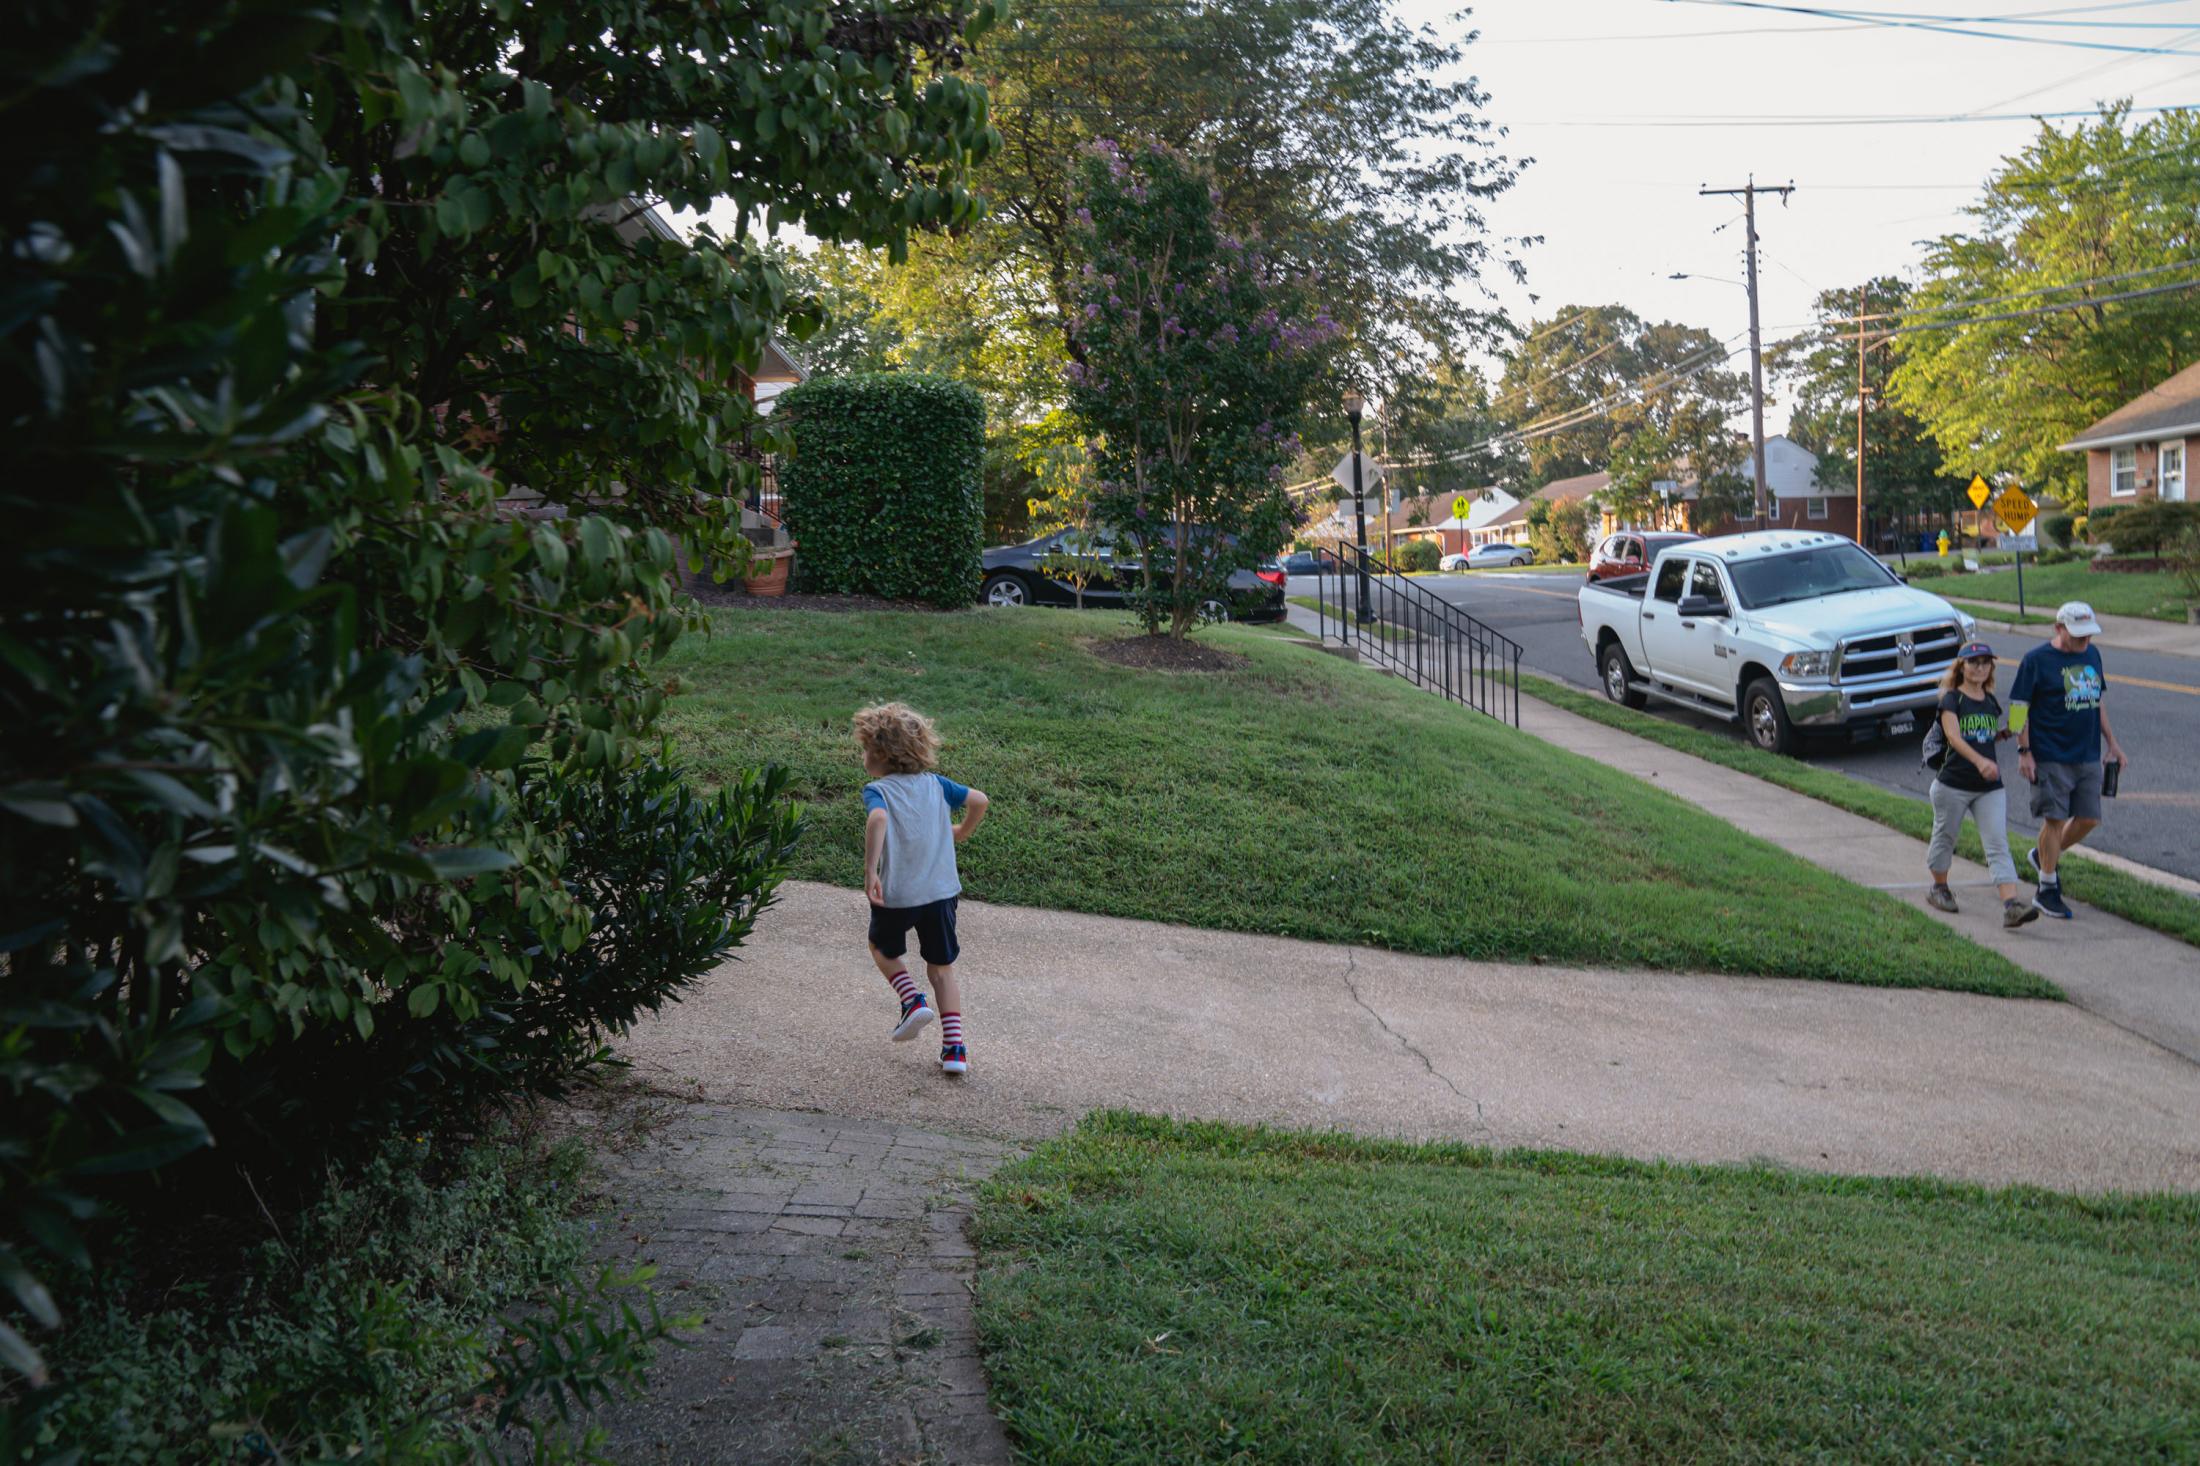 Kids are finally back at school - Oscar runs to his neighbor friends' house before...